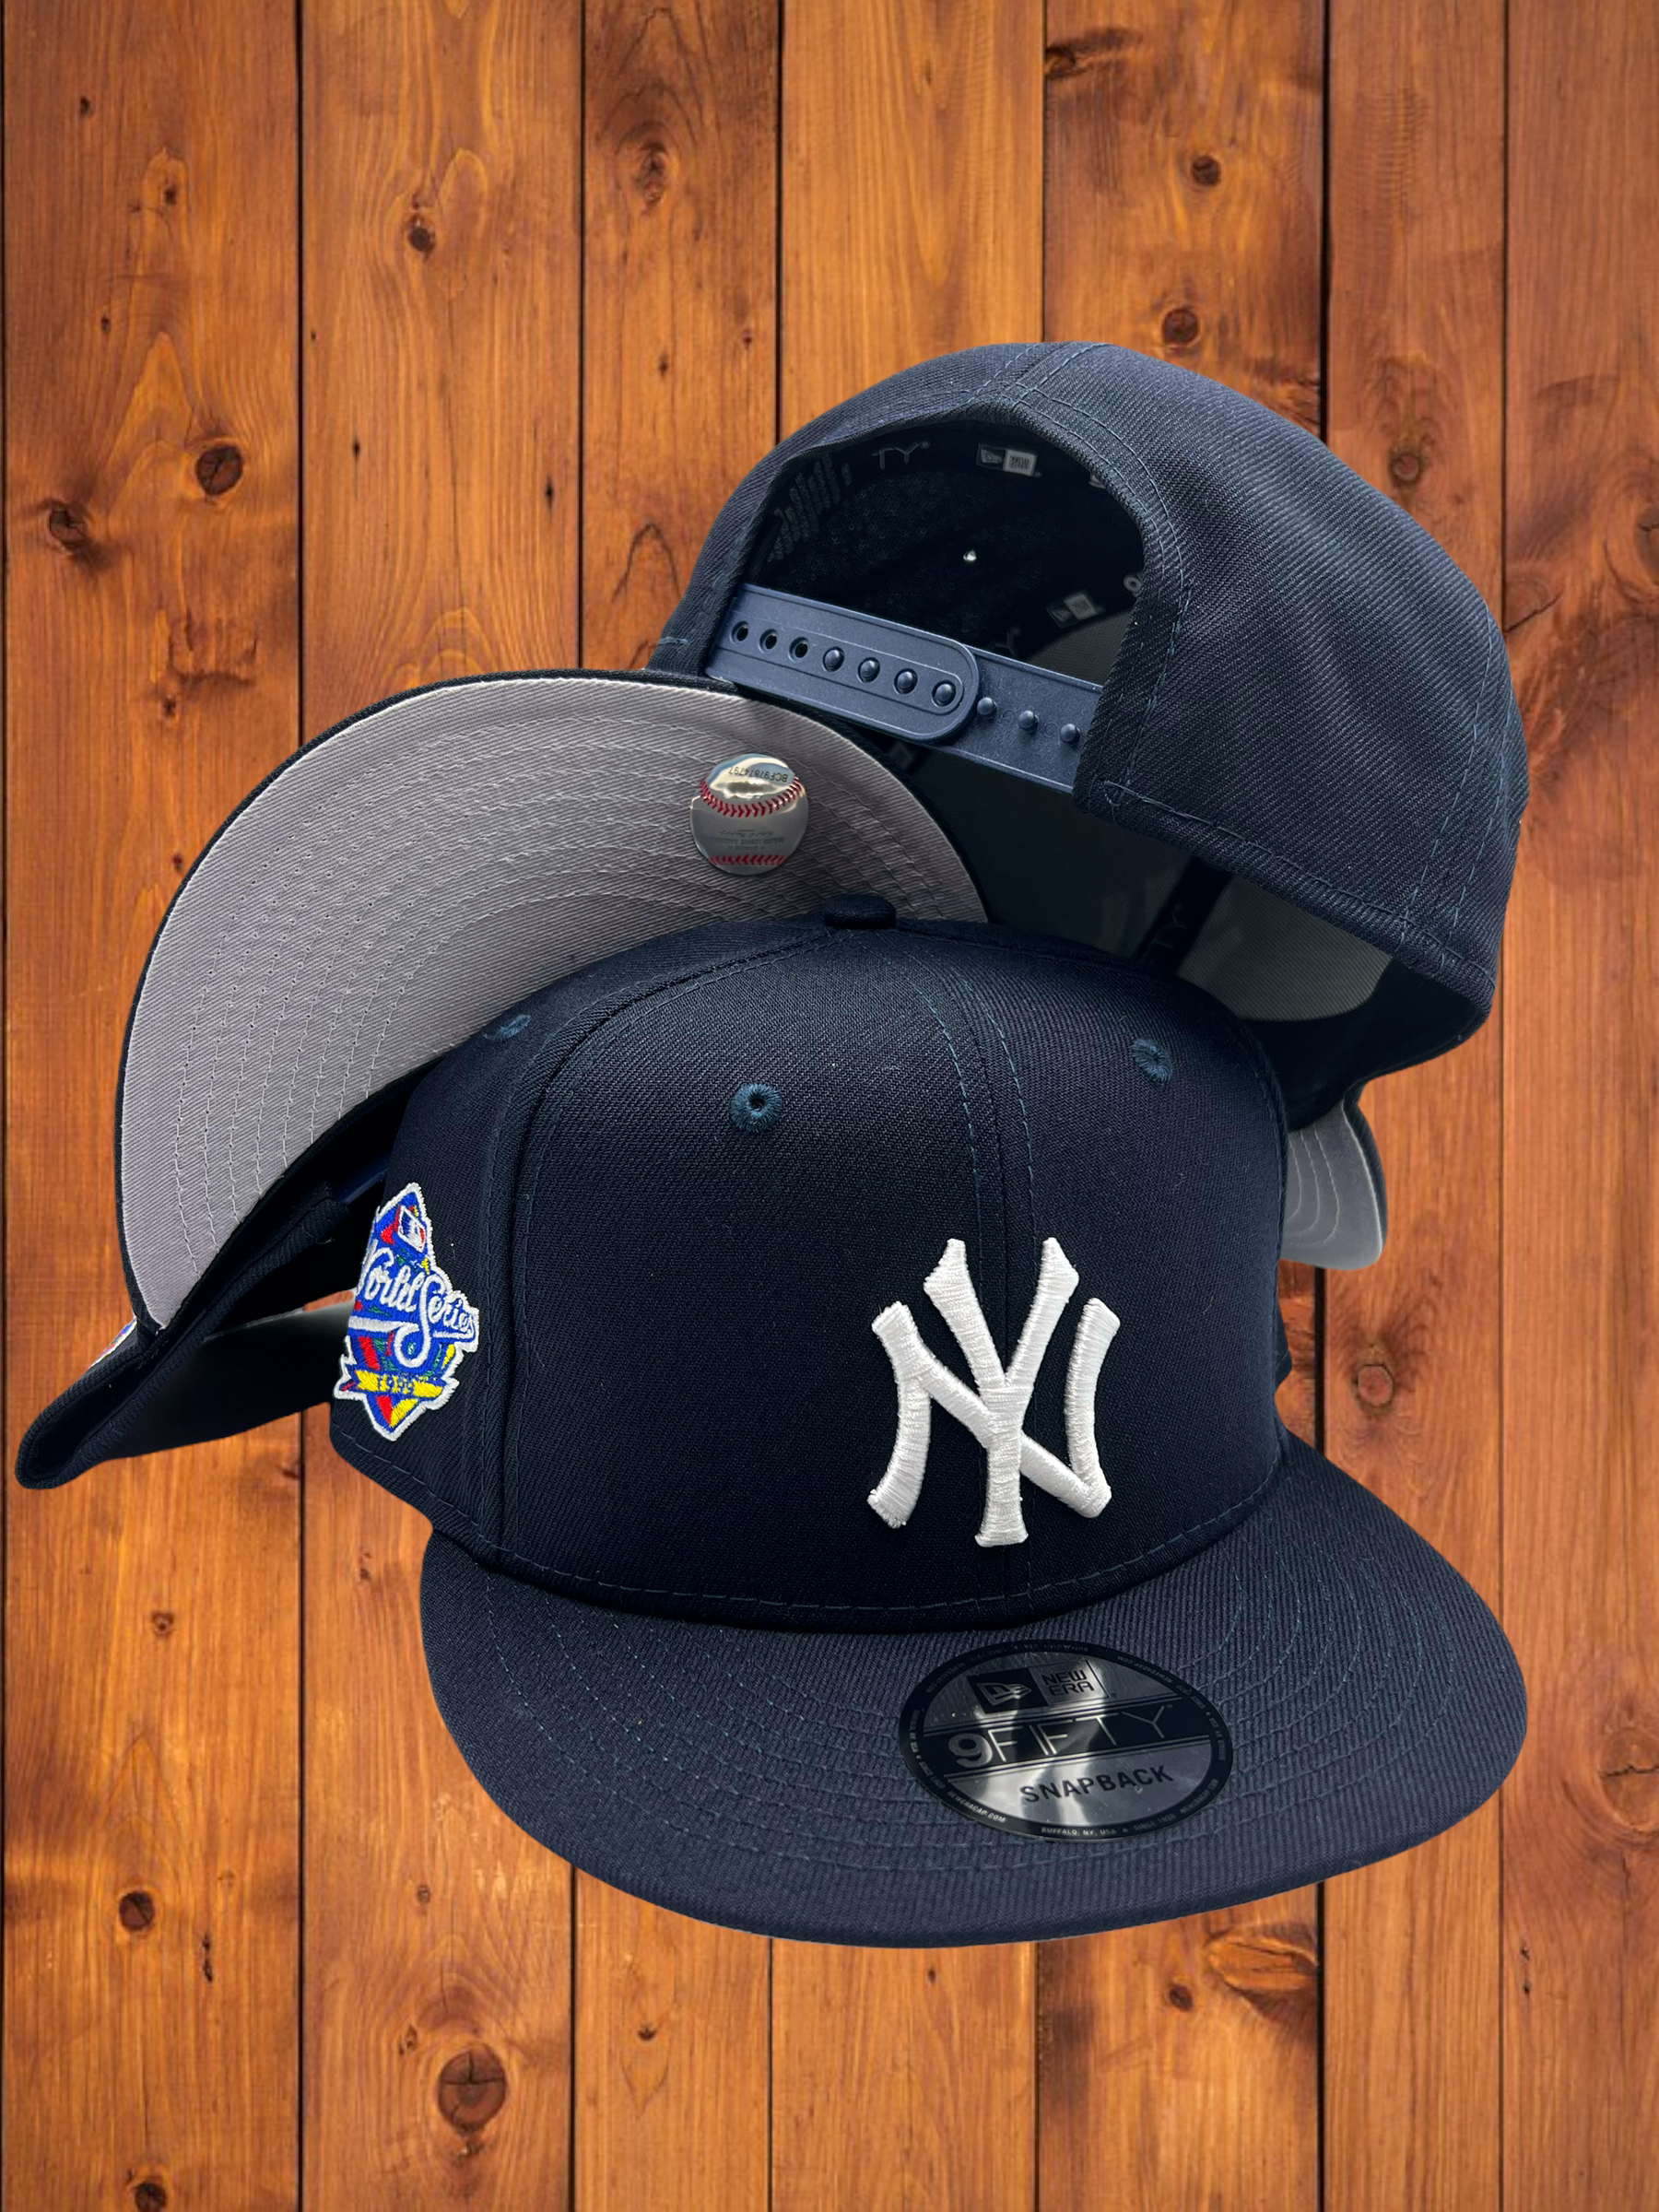 Yankees 99 WS New Era 59FIFTY Black Fitted Hat Royal Blue Bottom